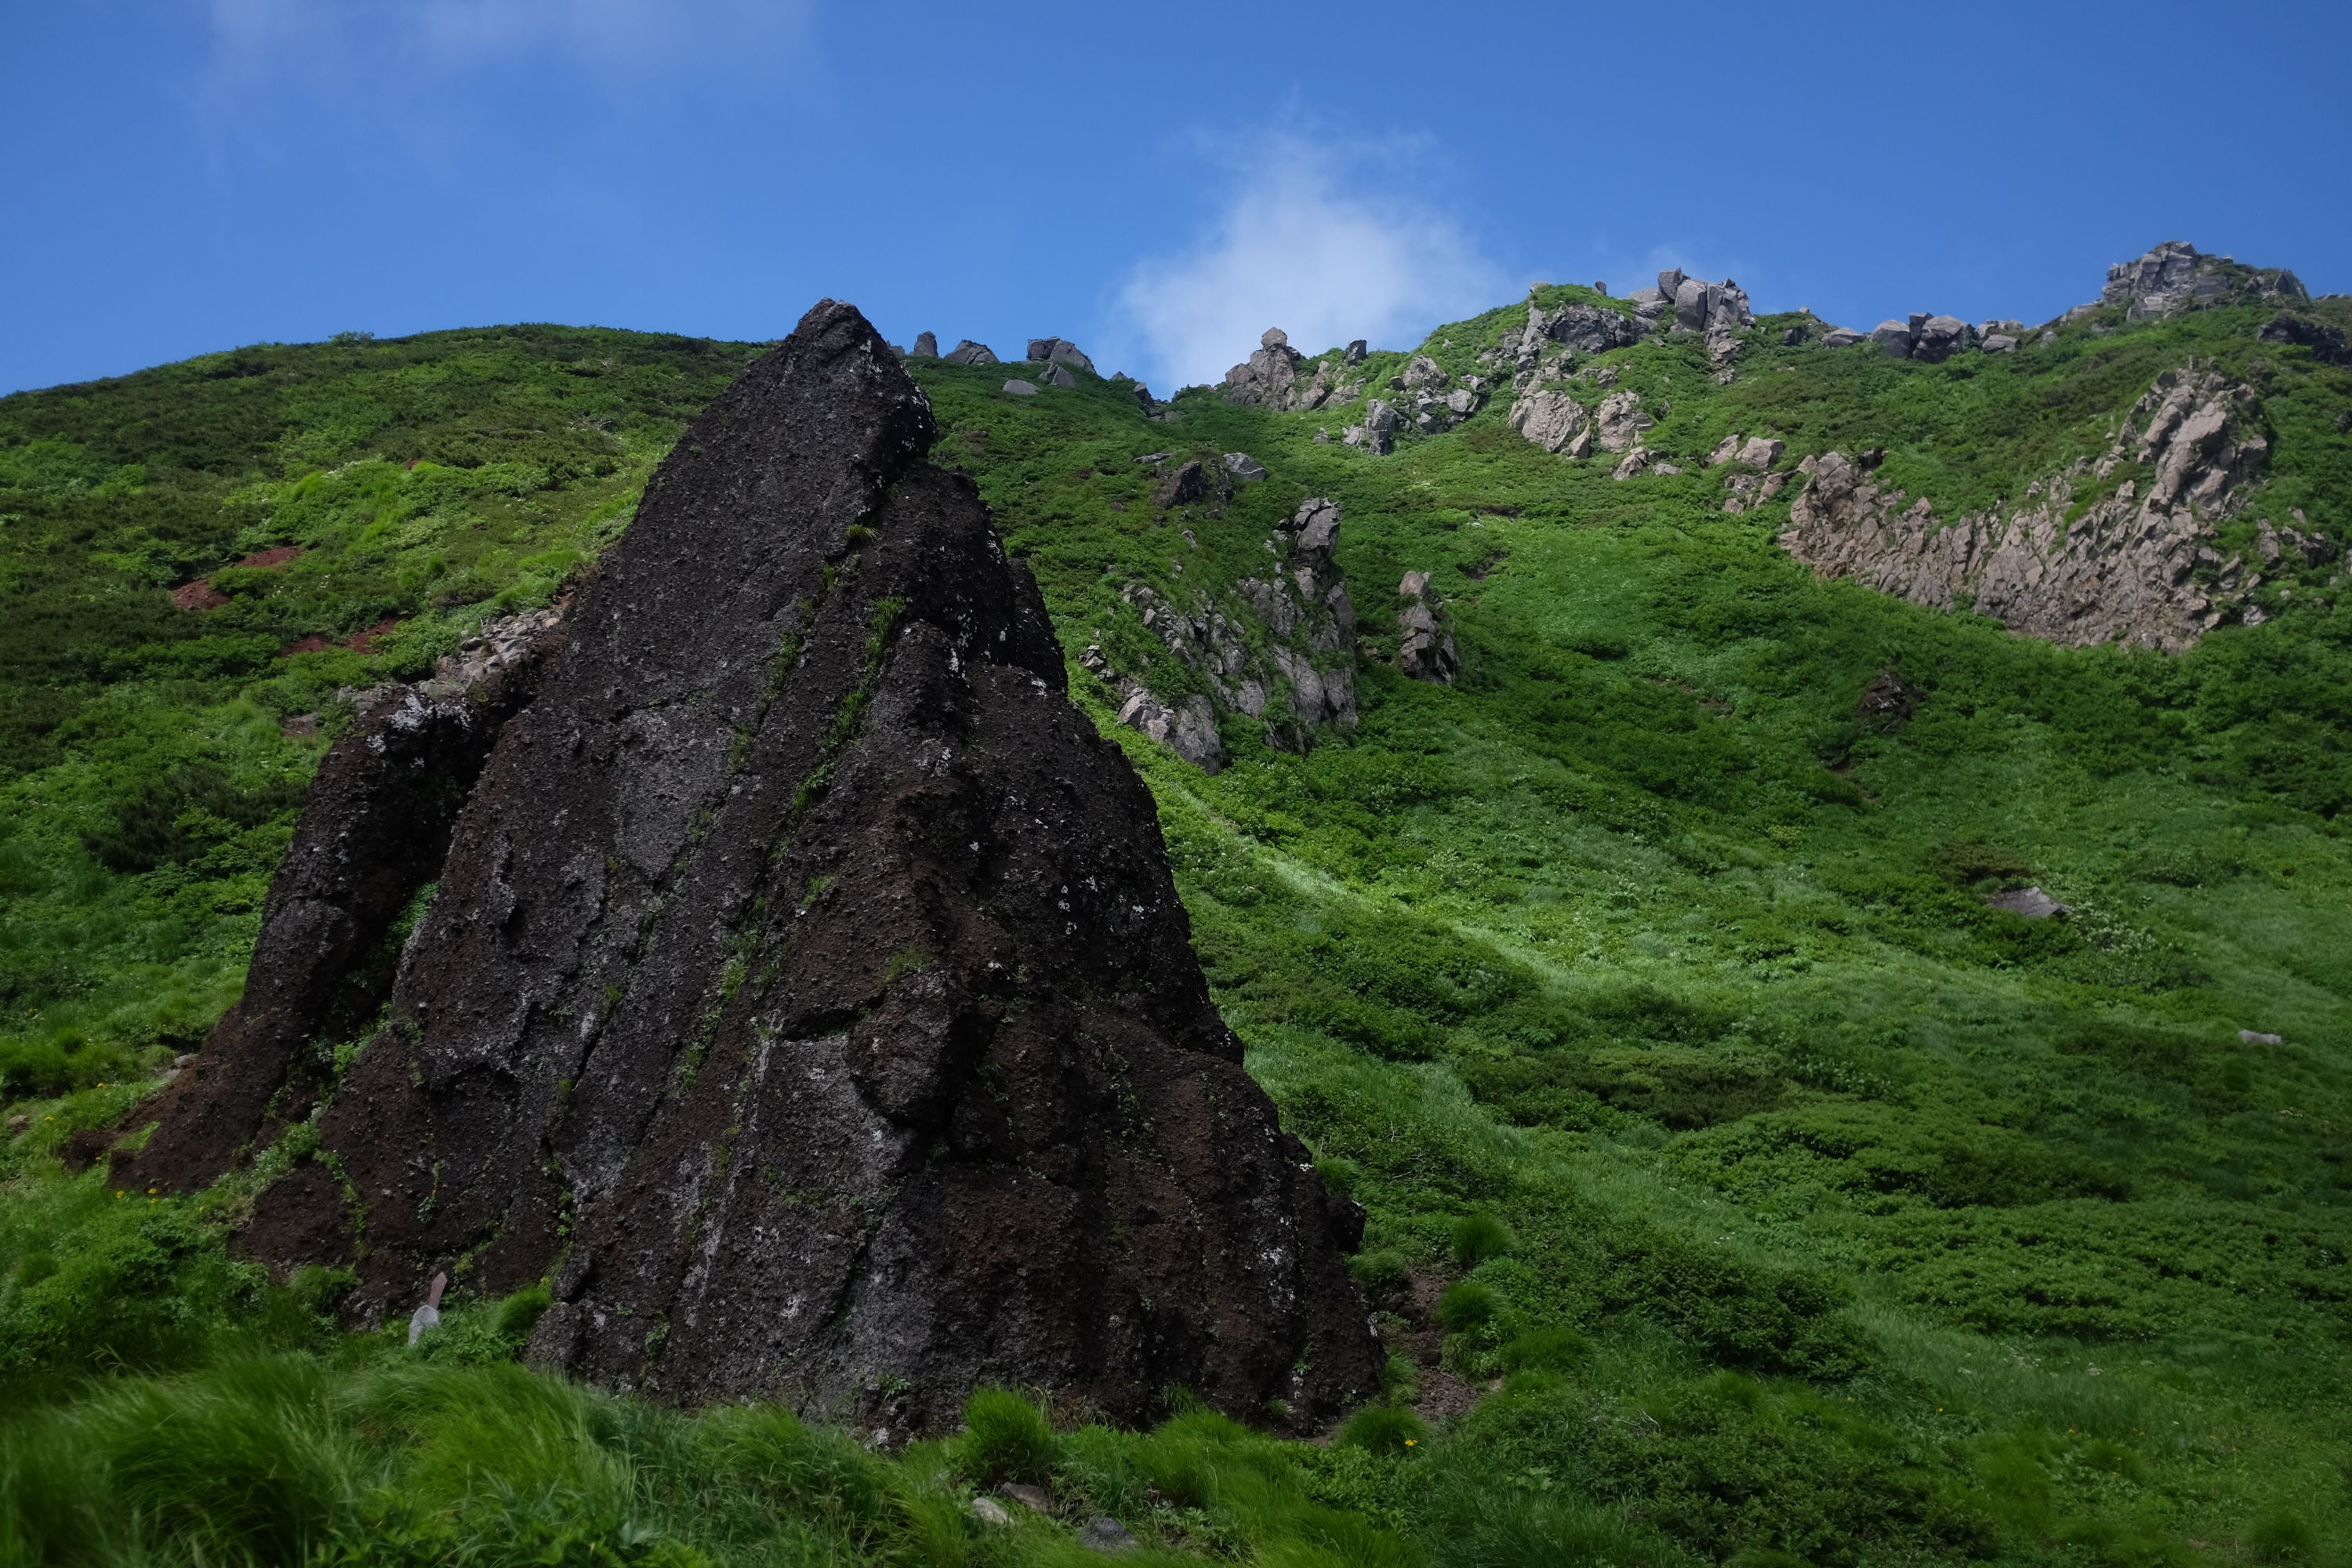 A large, triangular, black rock stands in a green meadow.